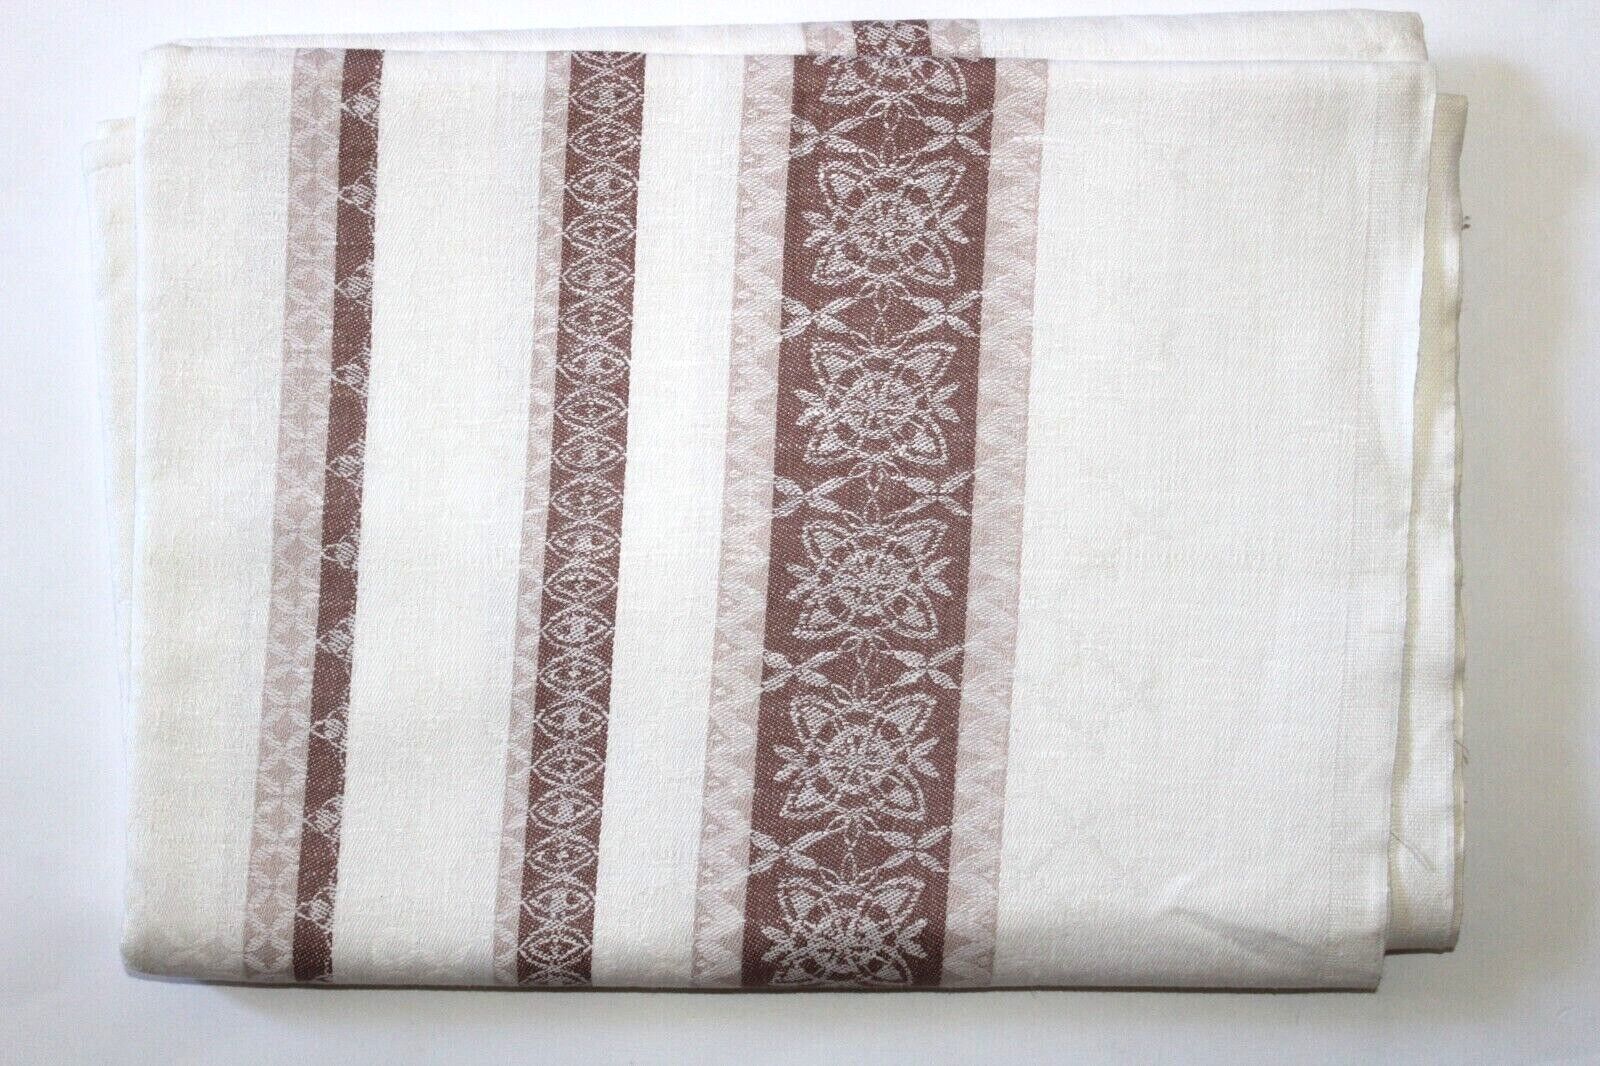 Vintage Soviet Union Linen Sheet, White with Brown Ornament, 84